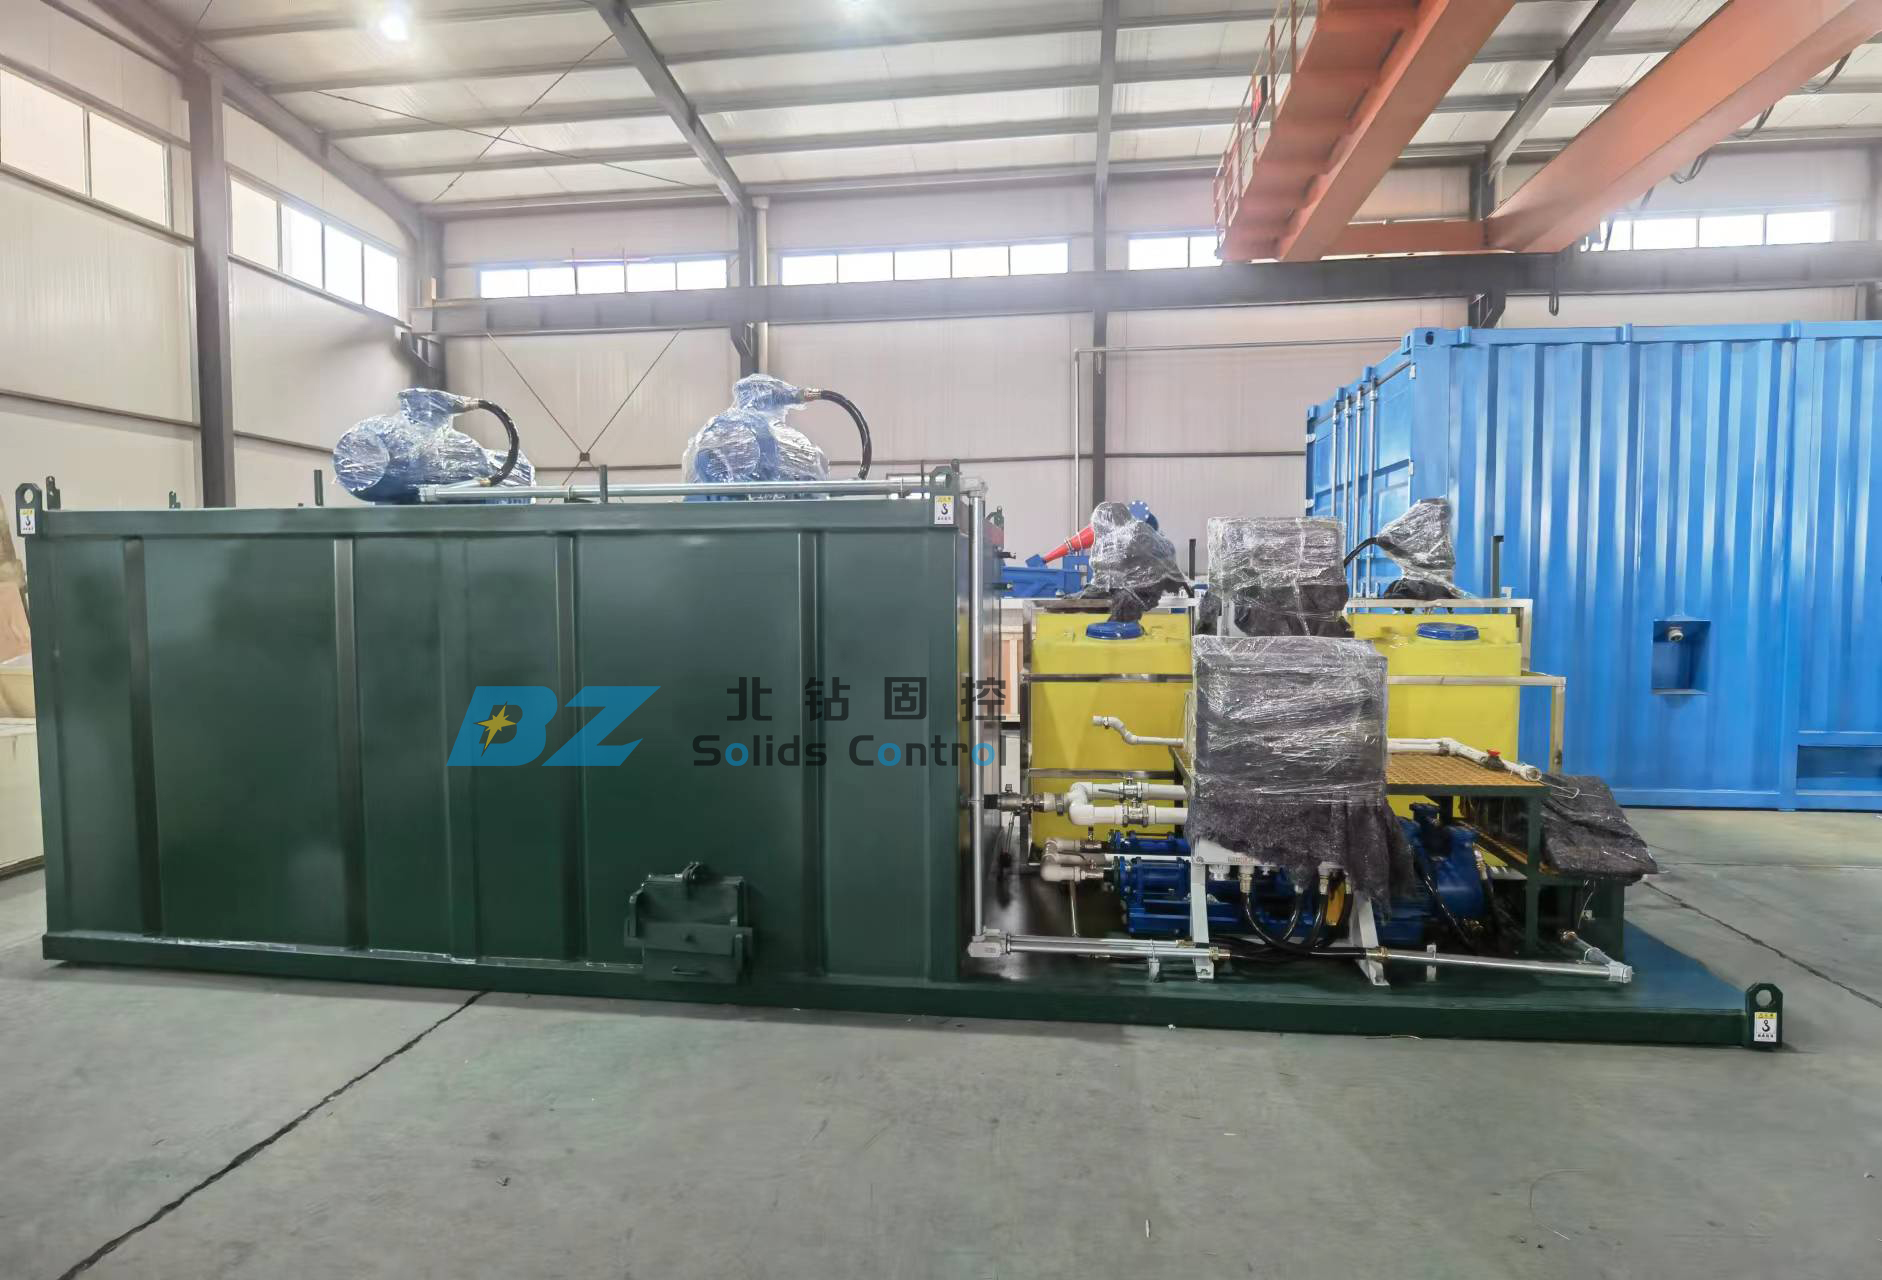 BZ Oil Sludge Treatment System was sent to domestic project site.